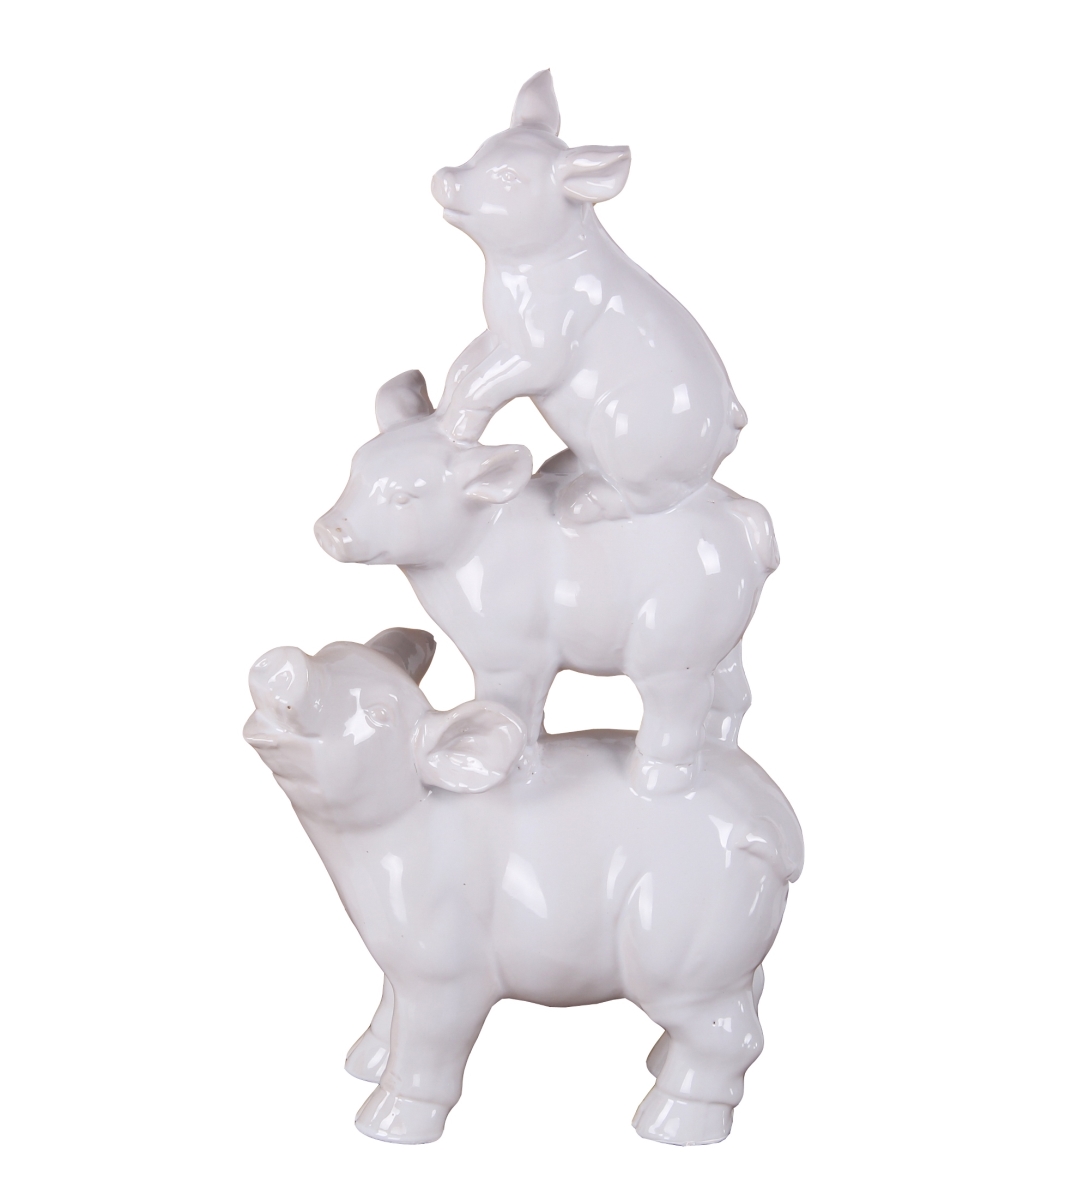 20309 9.5 X 5.5 X 17 In. Traditional Ceramic Pigs Statue, White